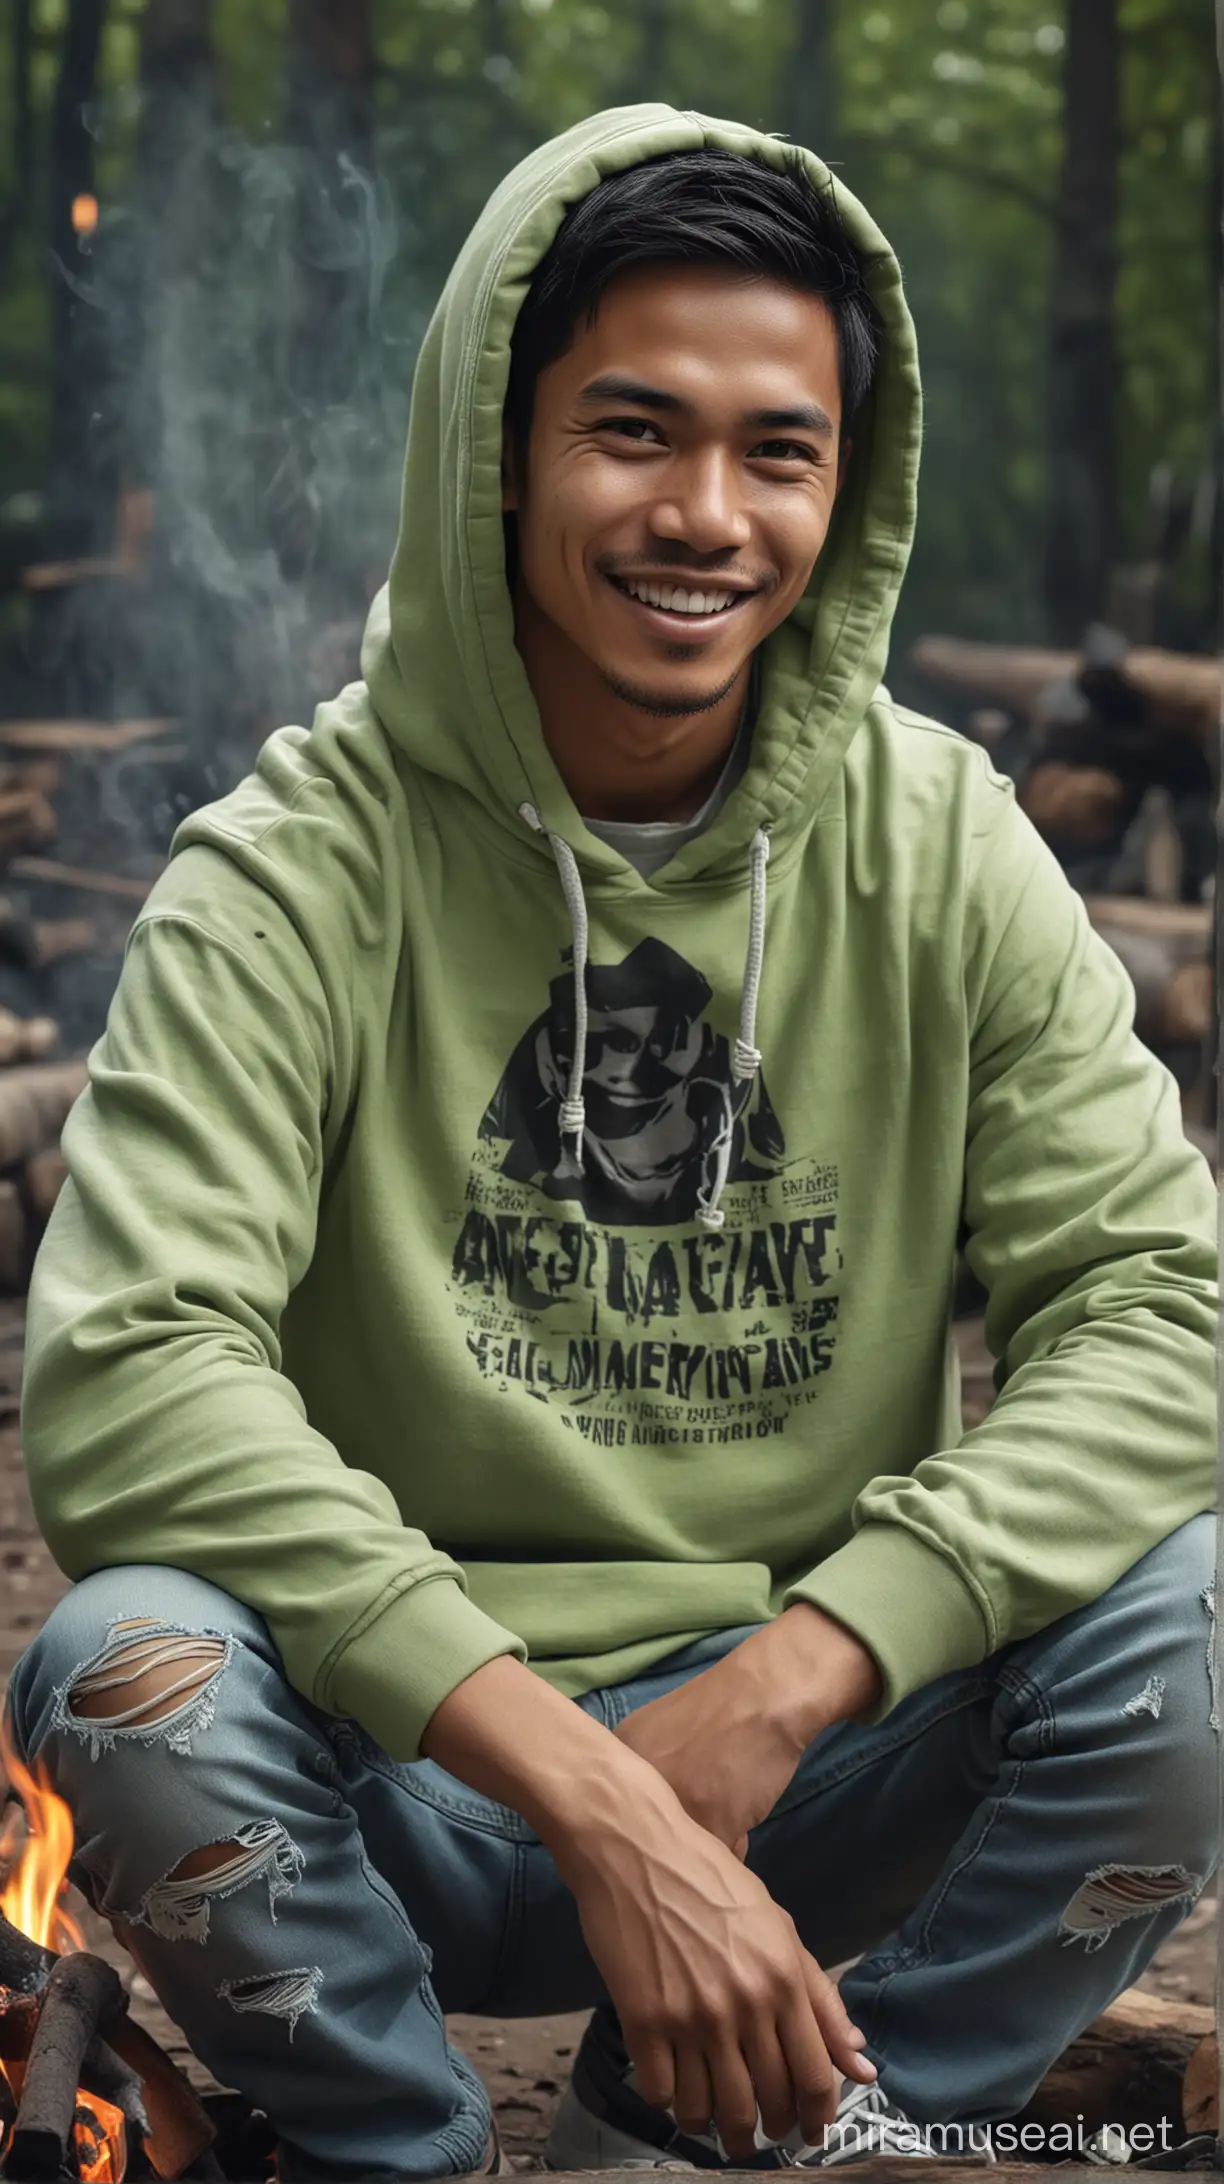 An Indonesian young man, wearing a light green hoodie, ripped short jeans, with a smiling facial expression full of warning messages, sat in front of a campfire drinking coffee, Hyper realistic, portrait, ultra hd, contrast, DLSR, 64k.